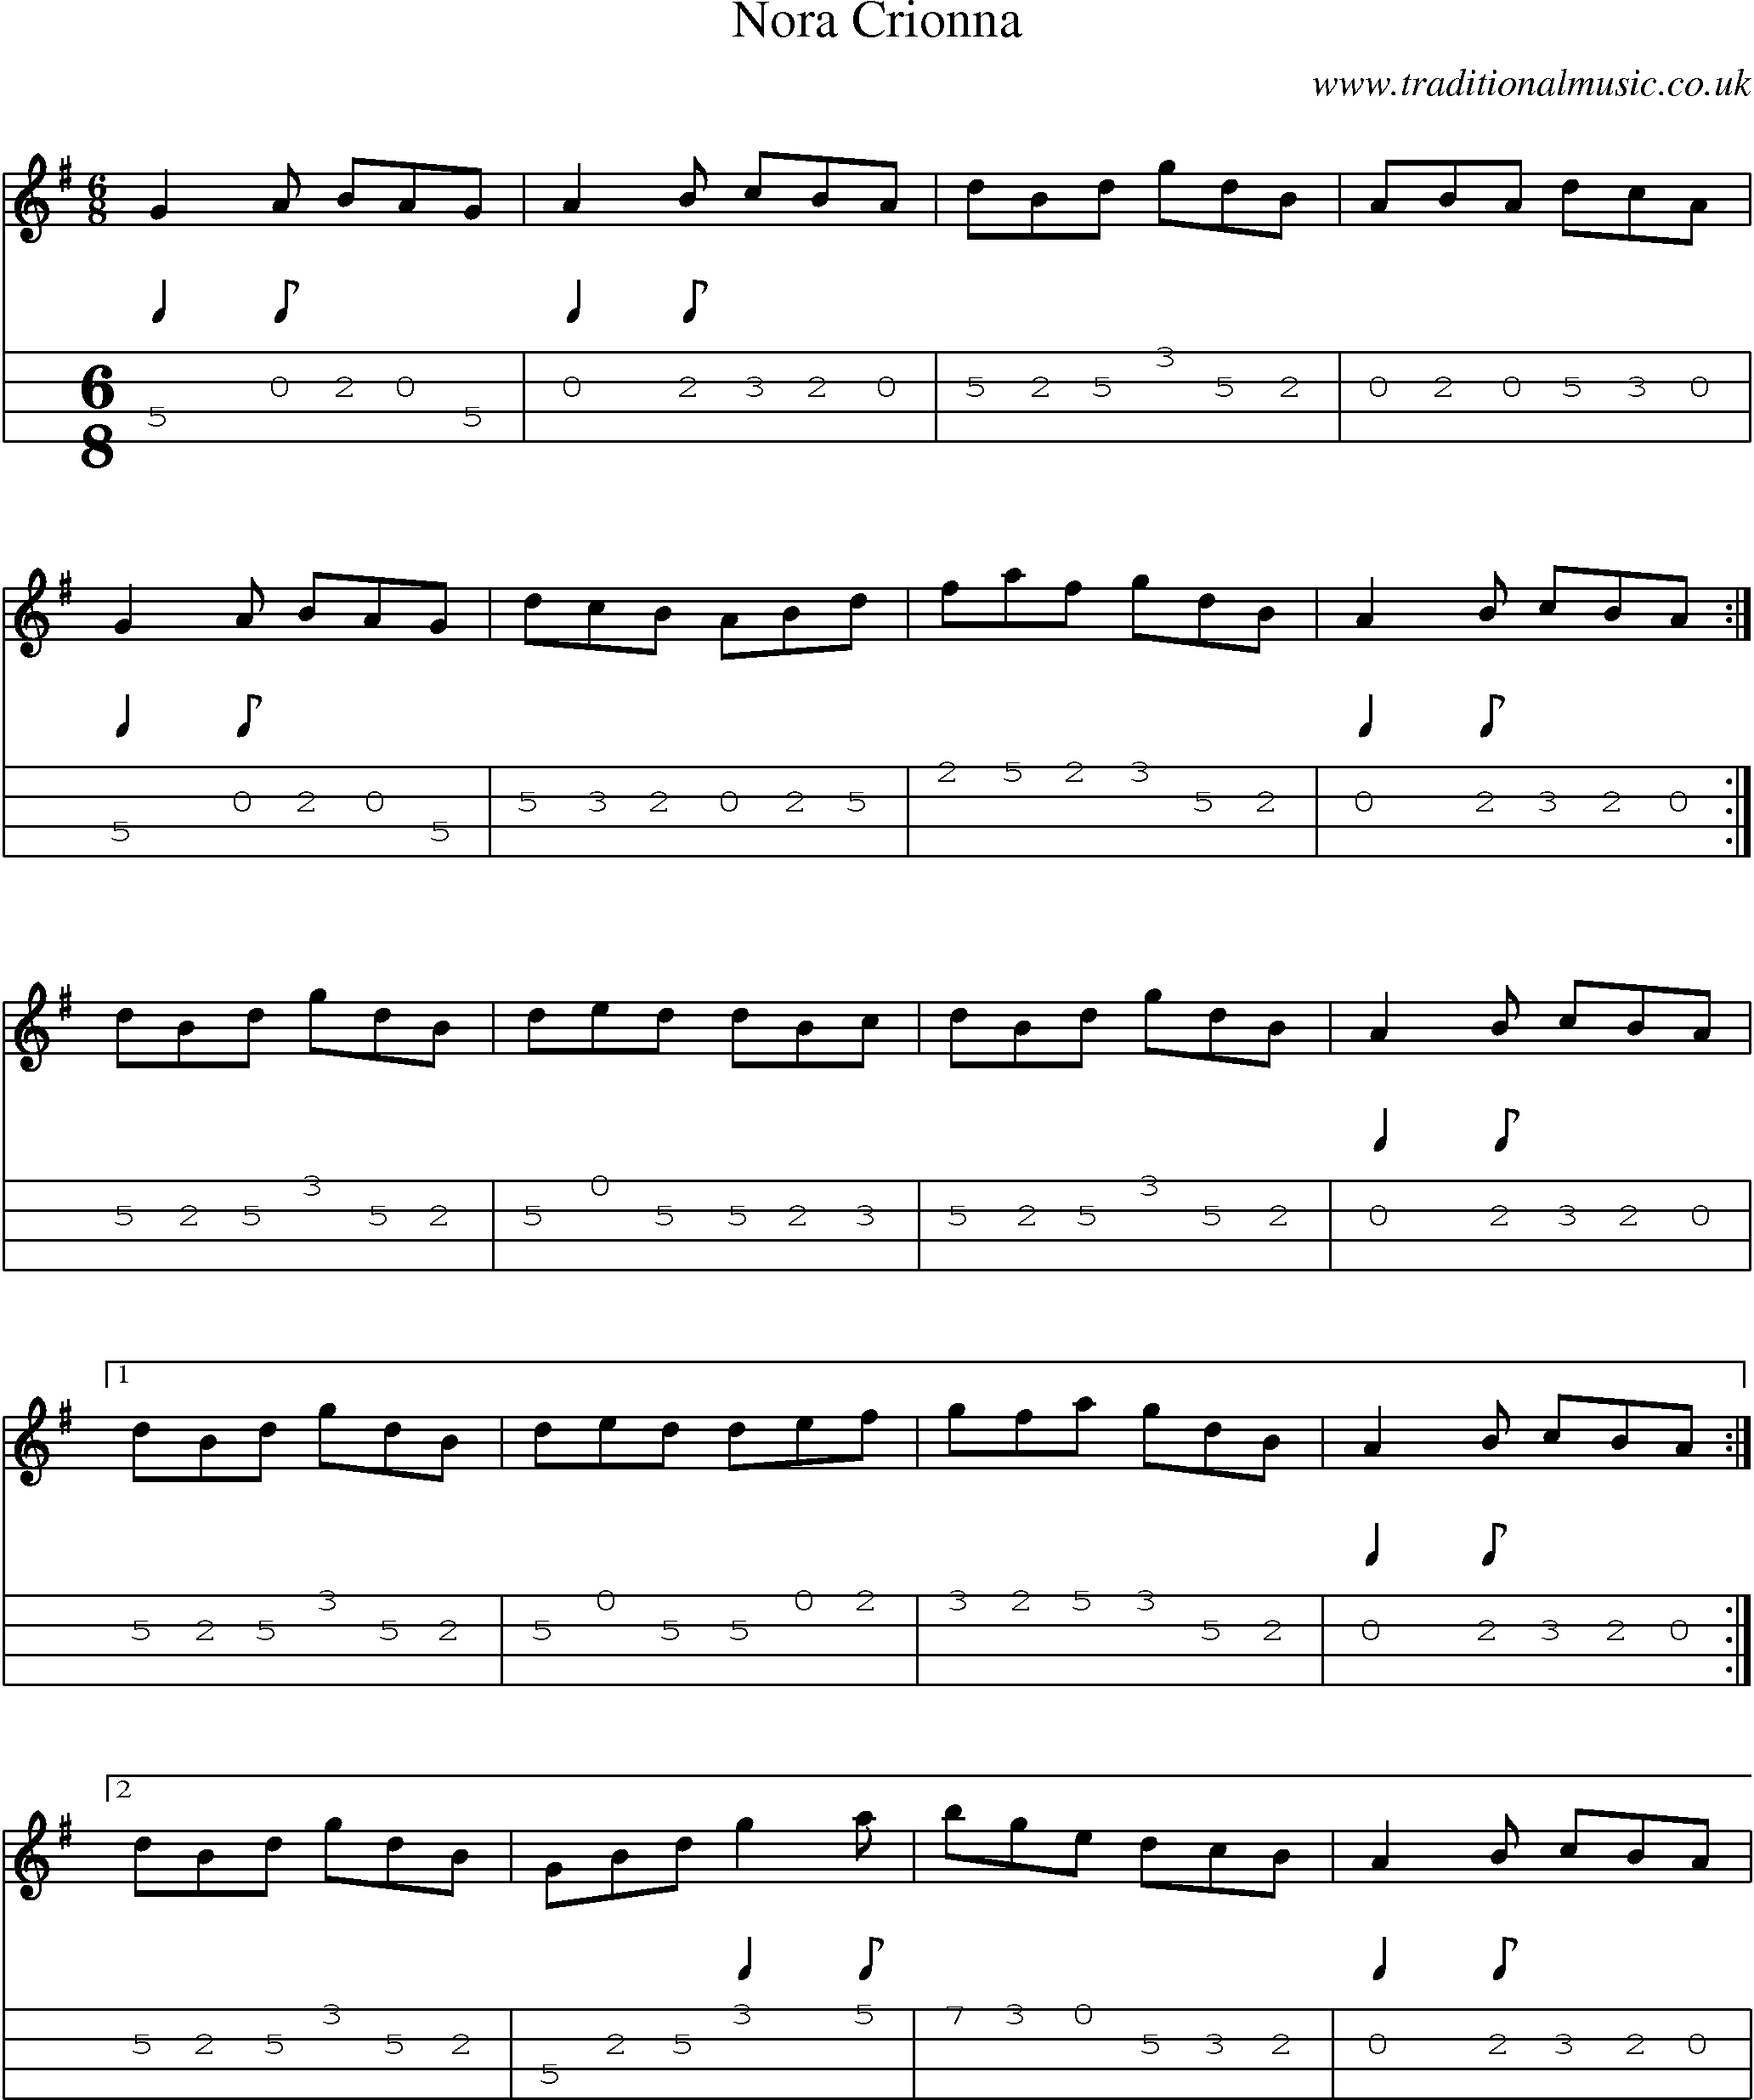 Music Score and Mandolin Tabs for Nora Crionna